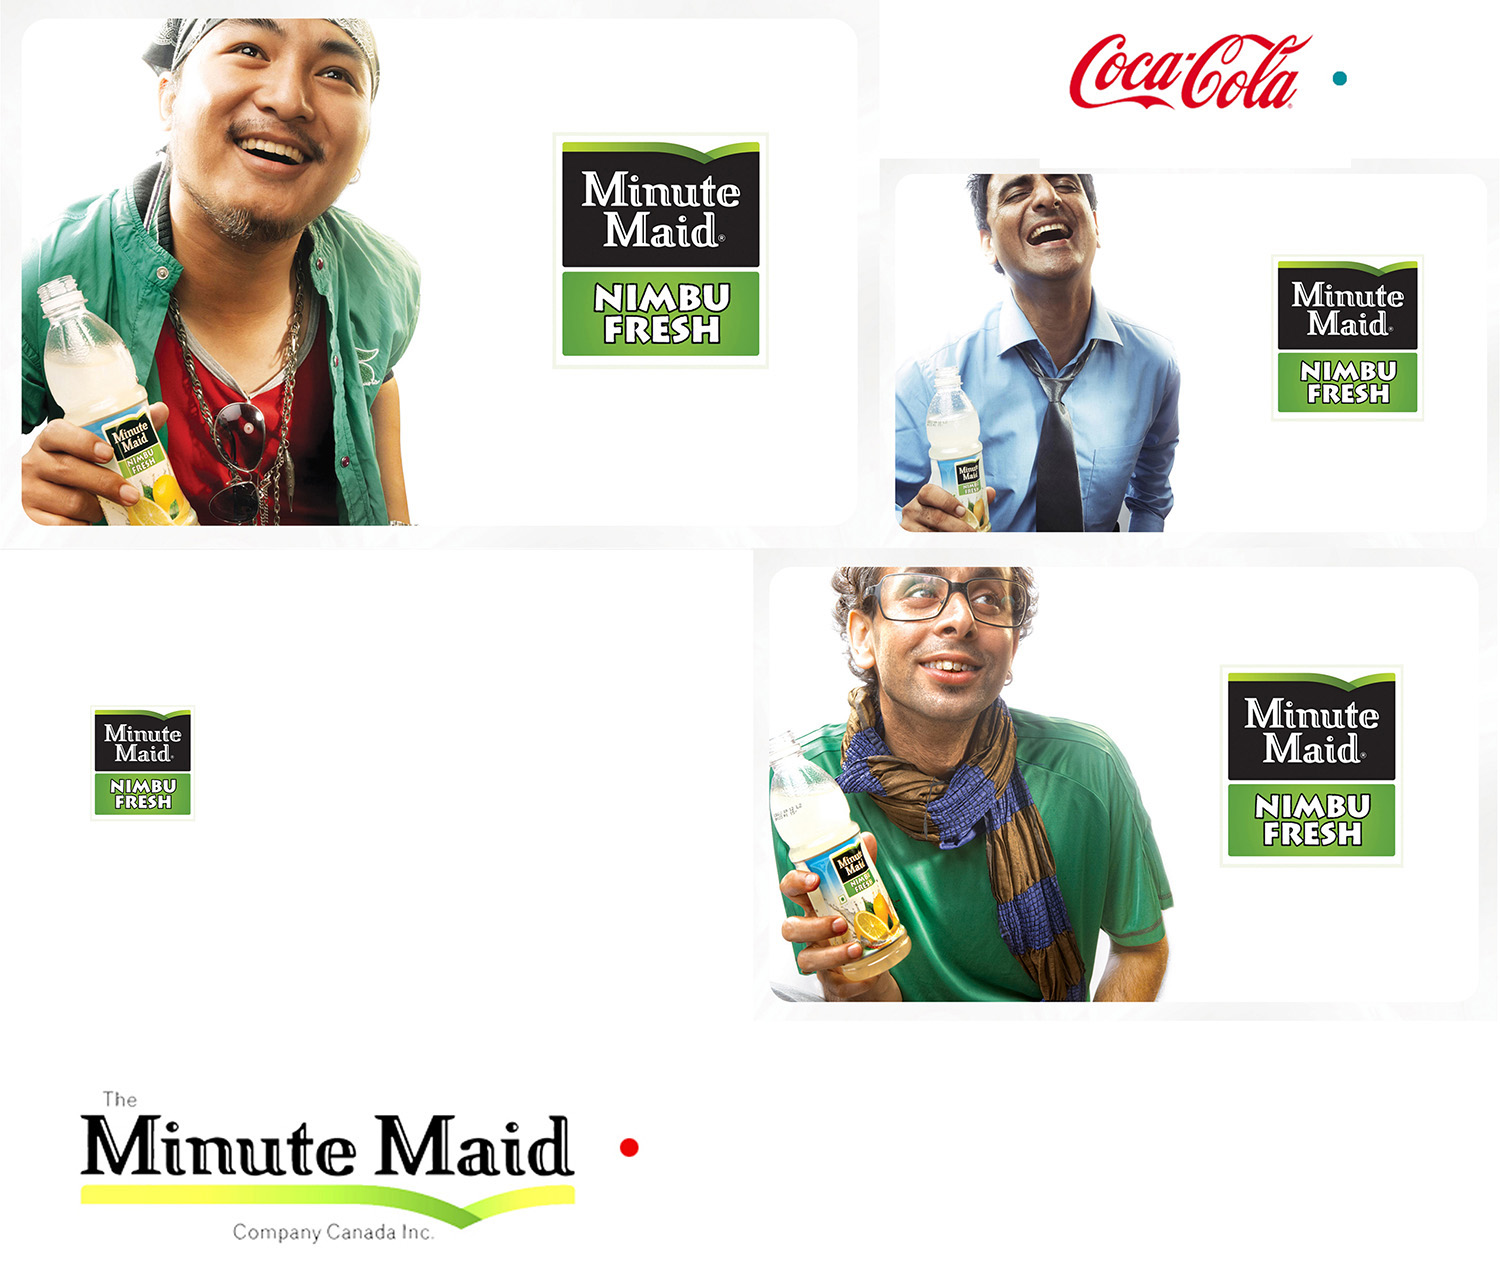 Minute Maid Clicked by Mukul Raut